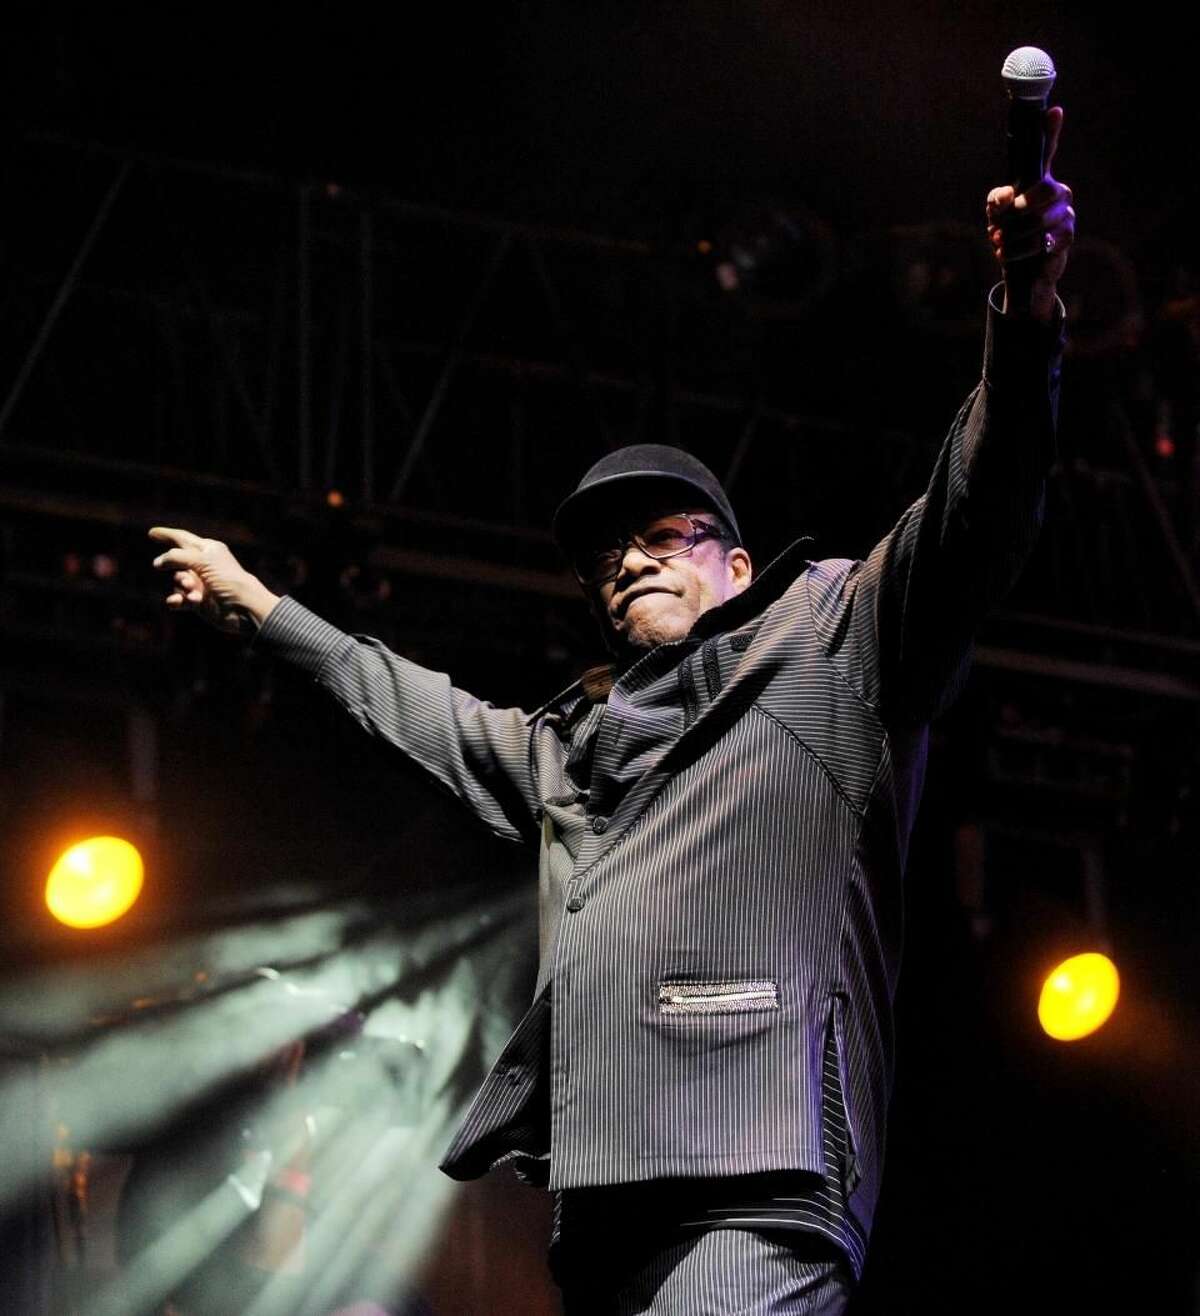 Singer Bobby Womack performs at the Coachella Valley Music and Arts Festival in Indio, Calif., on April 18, 2010. Womack, 70, a colorful and highly influential R&B singer-songwriter who impacted artists from the Rolling Stones to Damon Albarn, has died. (AP Photo/Chris Pizzello, file)